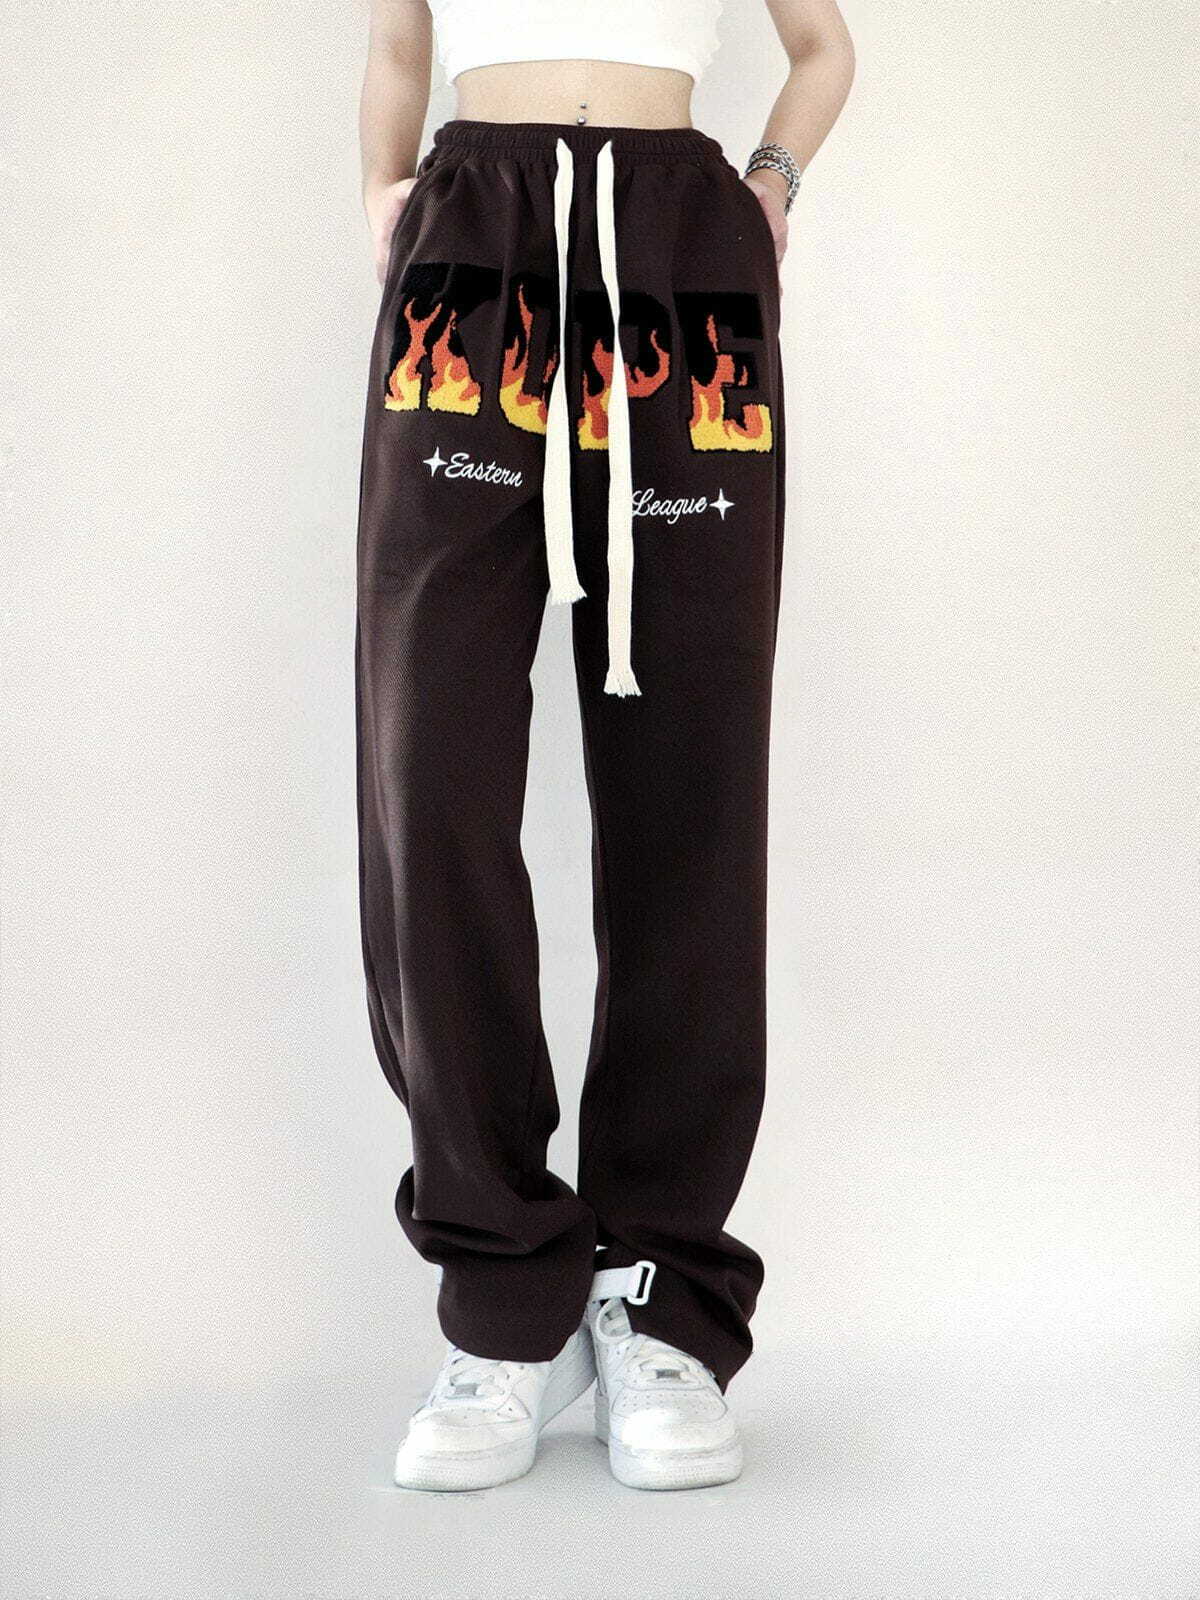 flaming letters sweatpants edgy & vibrant streetwear 5680